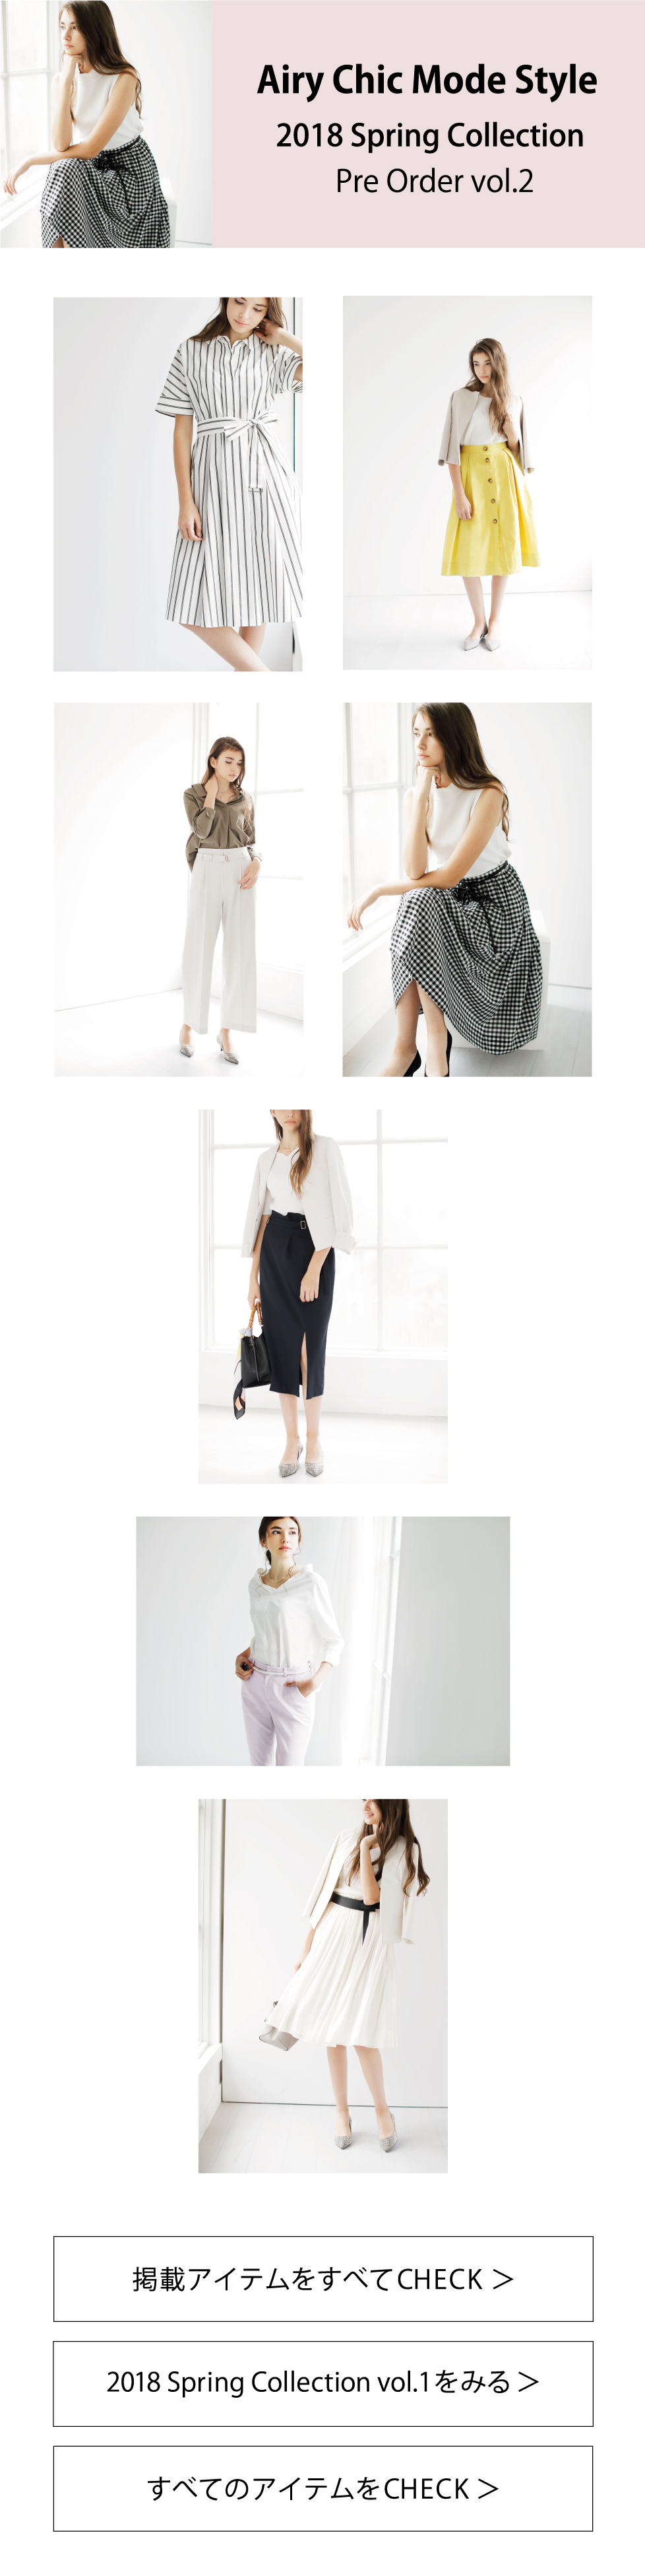 Airy Chic Mode Style 2018 Spring Collection Pre Order vol.2